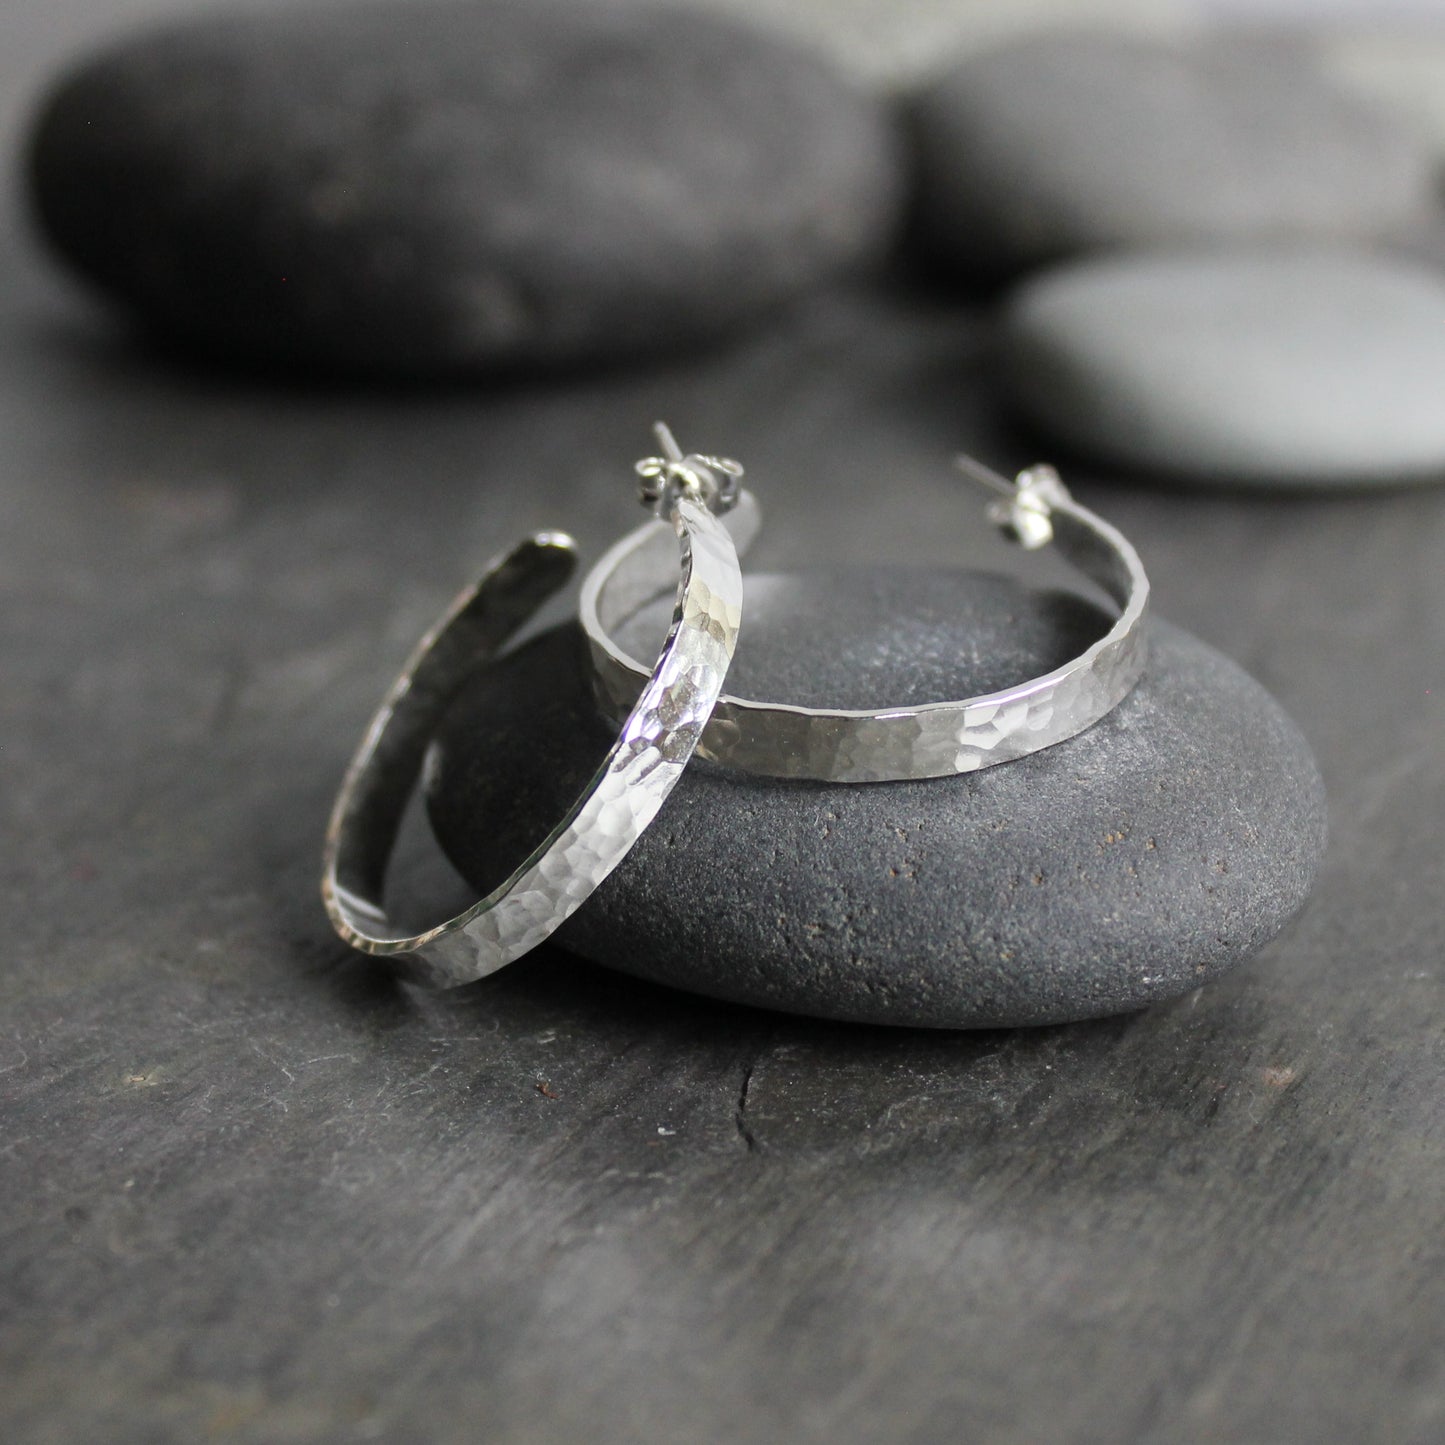 Handmade sterling silver 4mm wide hammered 1 1/4 inch diameter hoops with sterling silver posts.